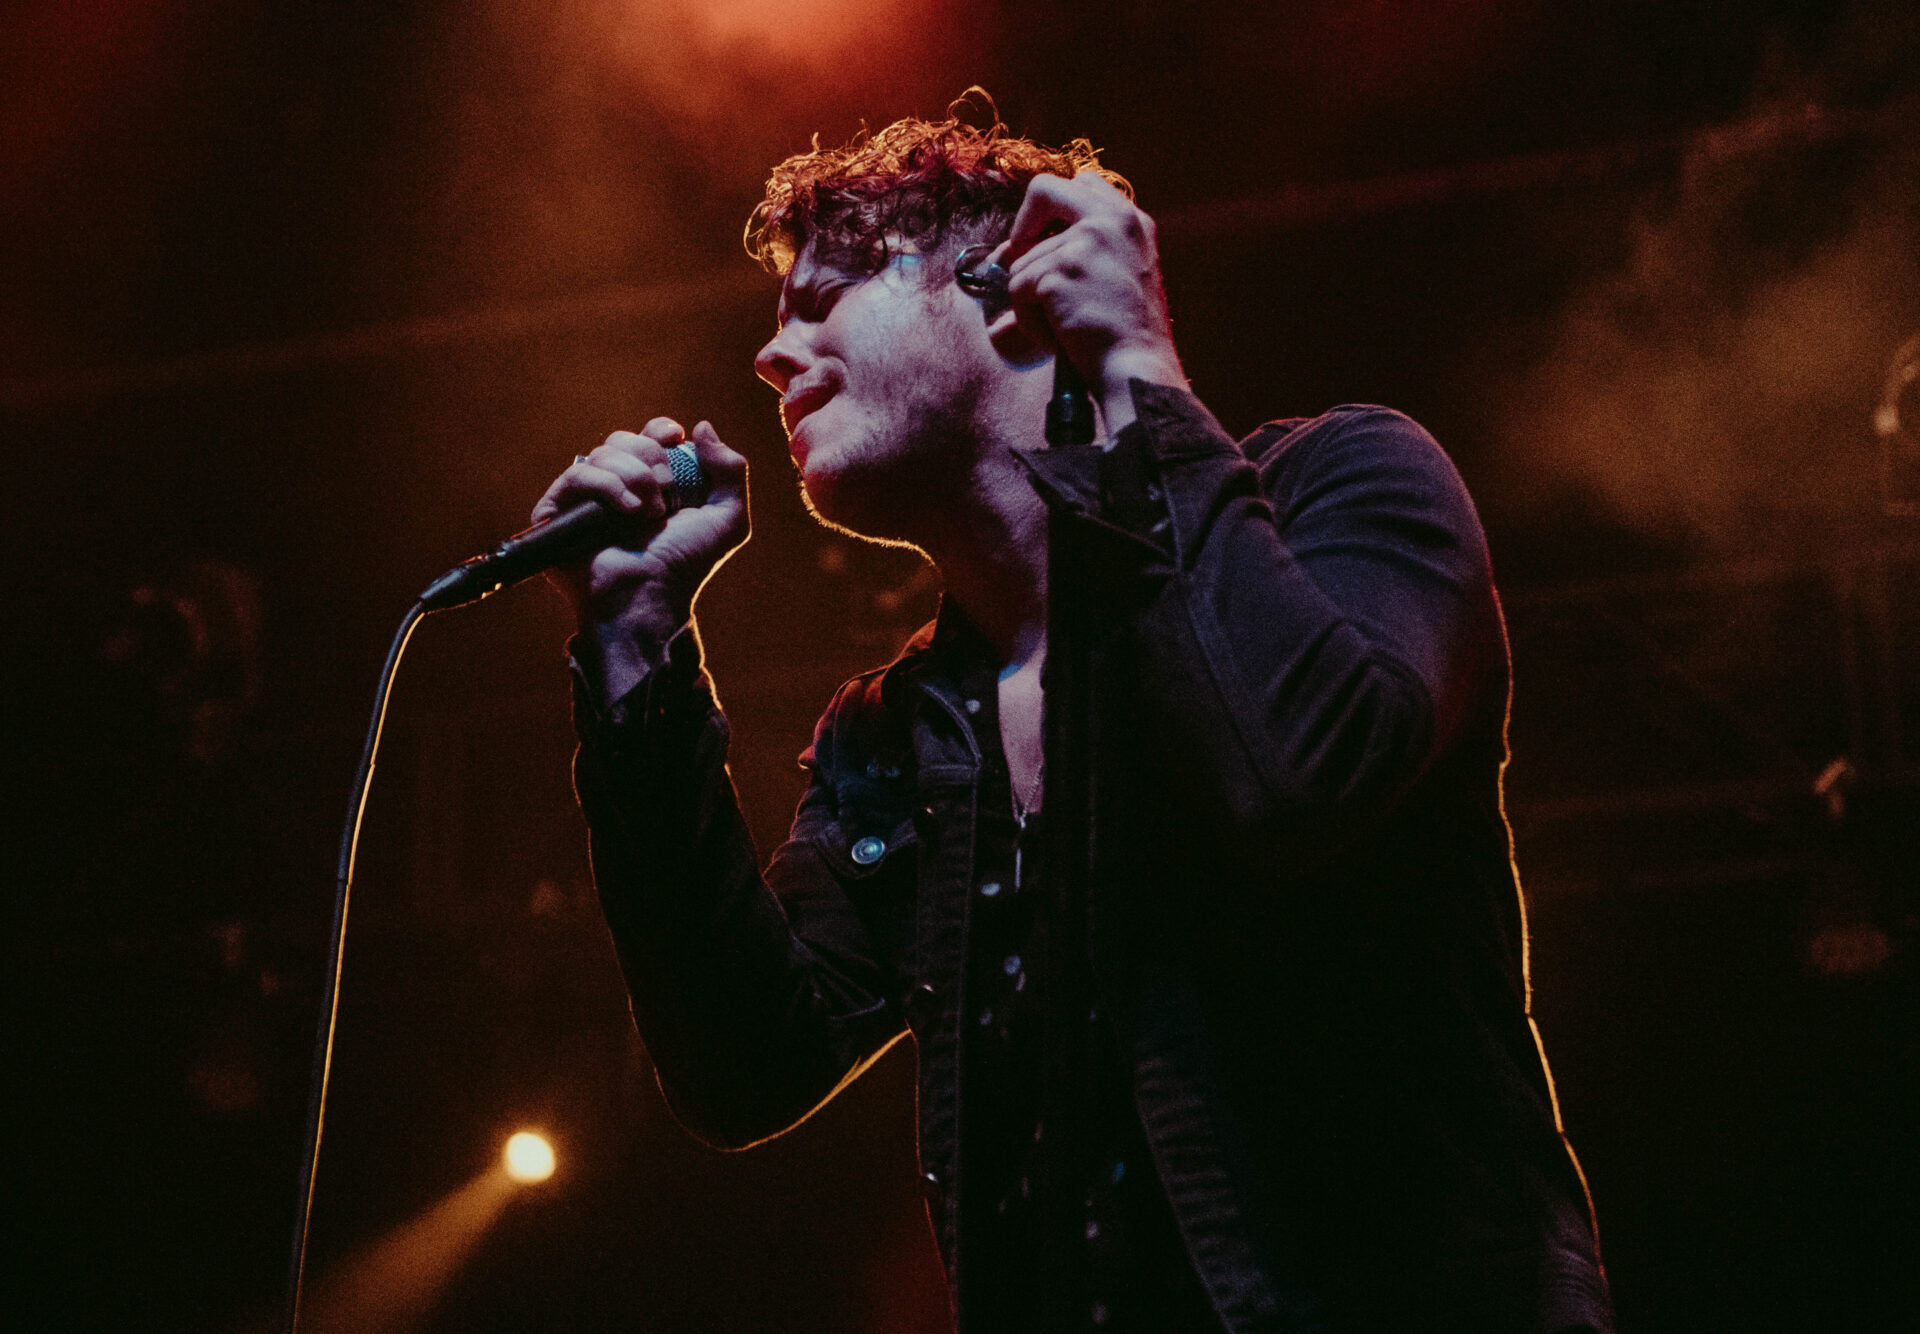 LIVE REVIEW: Anderson East brings blues to Thalia Hall